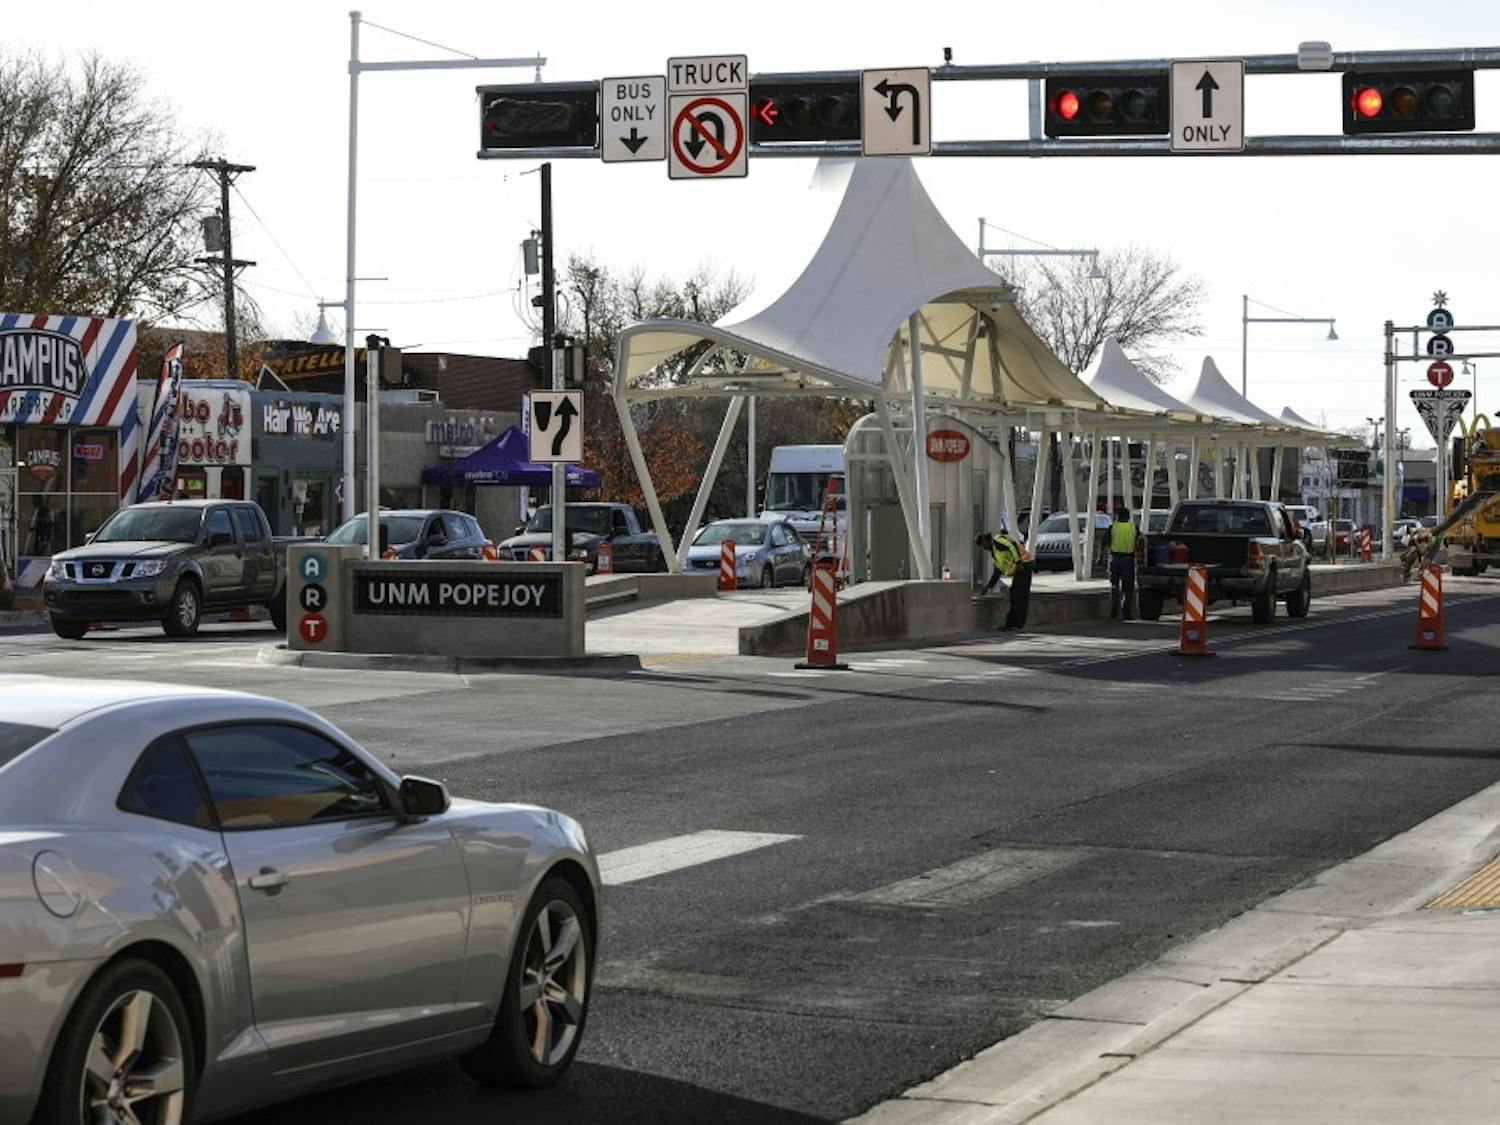 Cars pass the intersection of Yale Blvd. SE and Cornell Drive SE, near new street signs for the Albuquerque Rapid Transit system, Nov 29, 2017.
